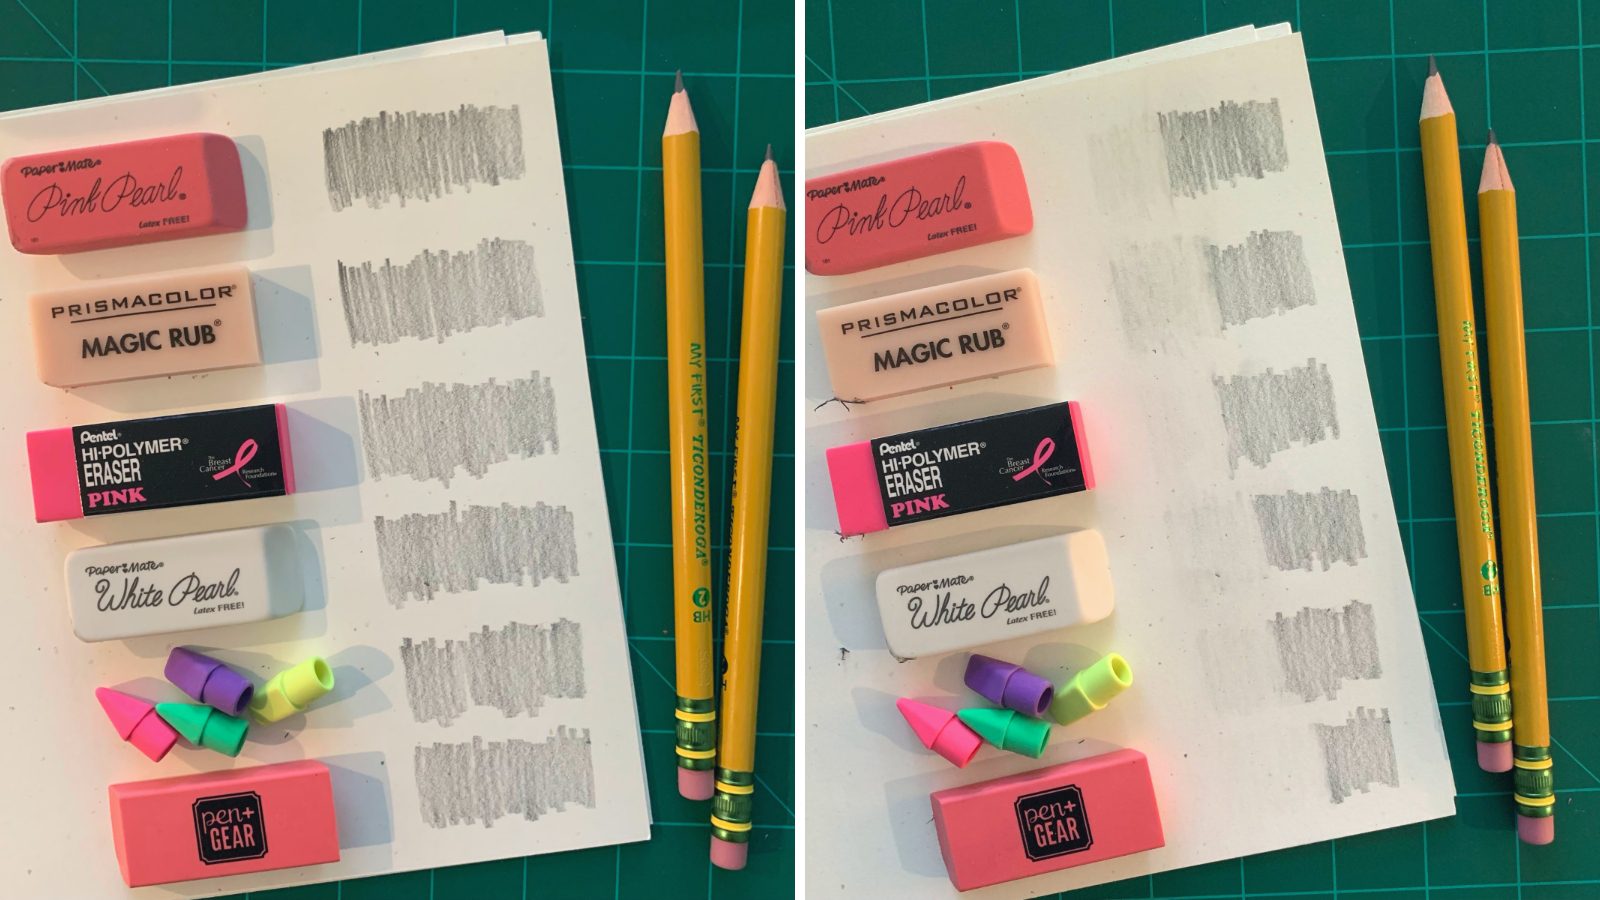 Six erasers lined up next to pencil marks, showing how well each one works (Best Erasers)